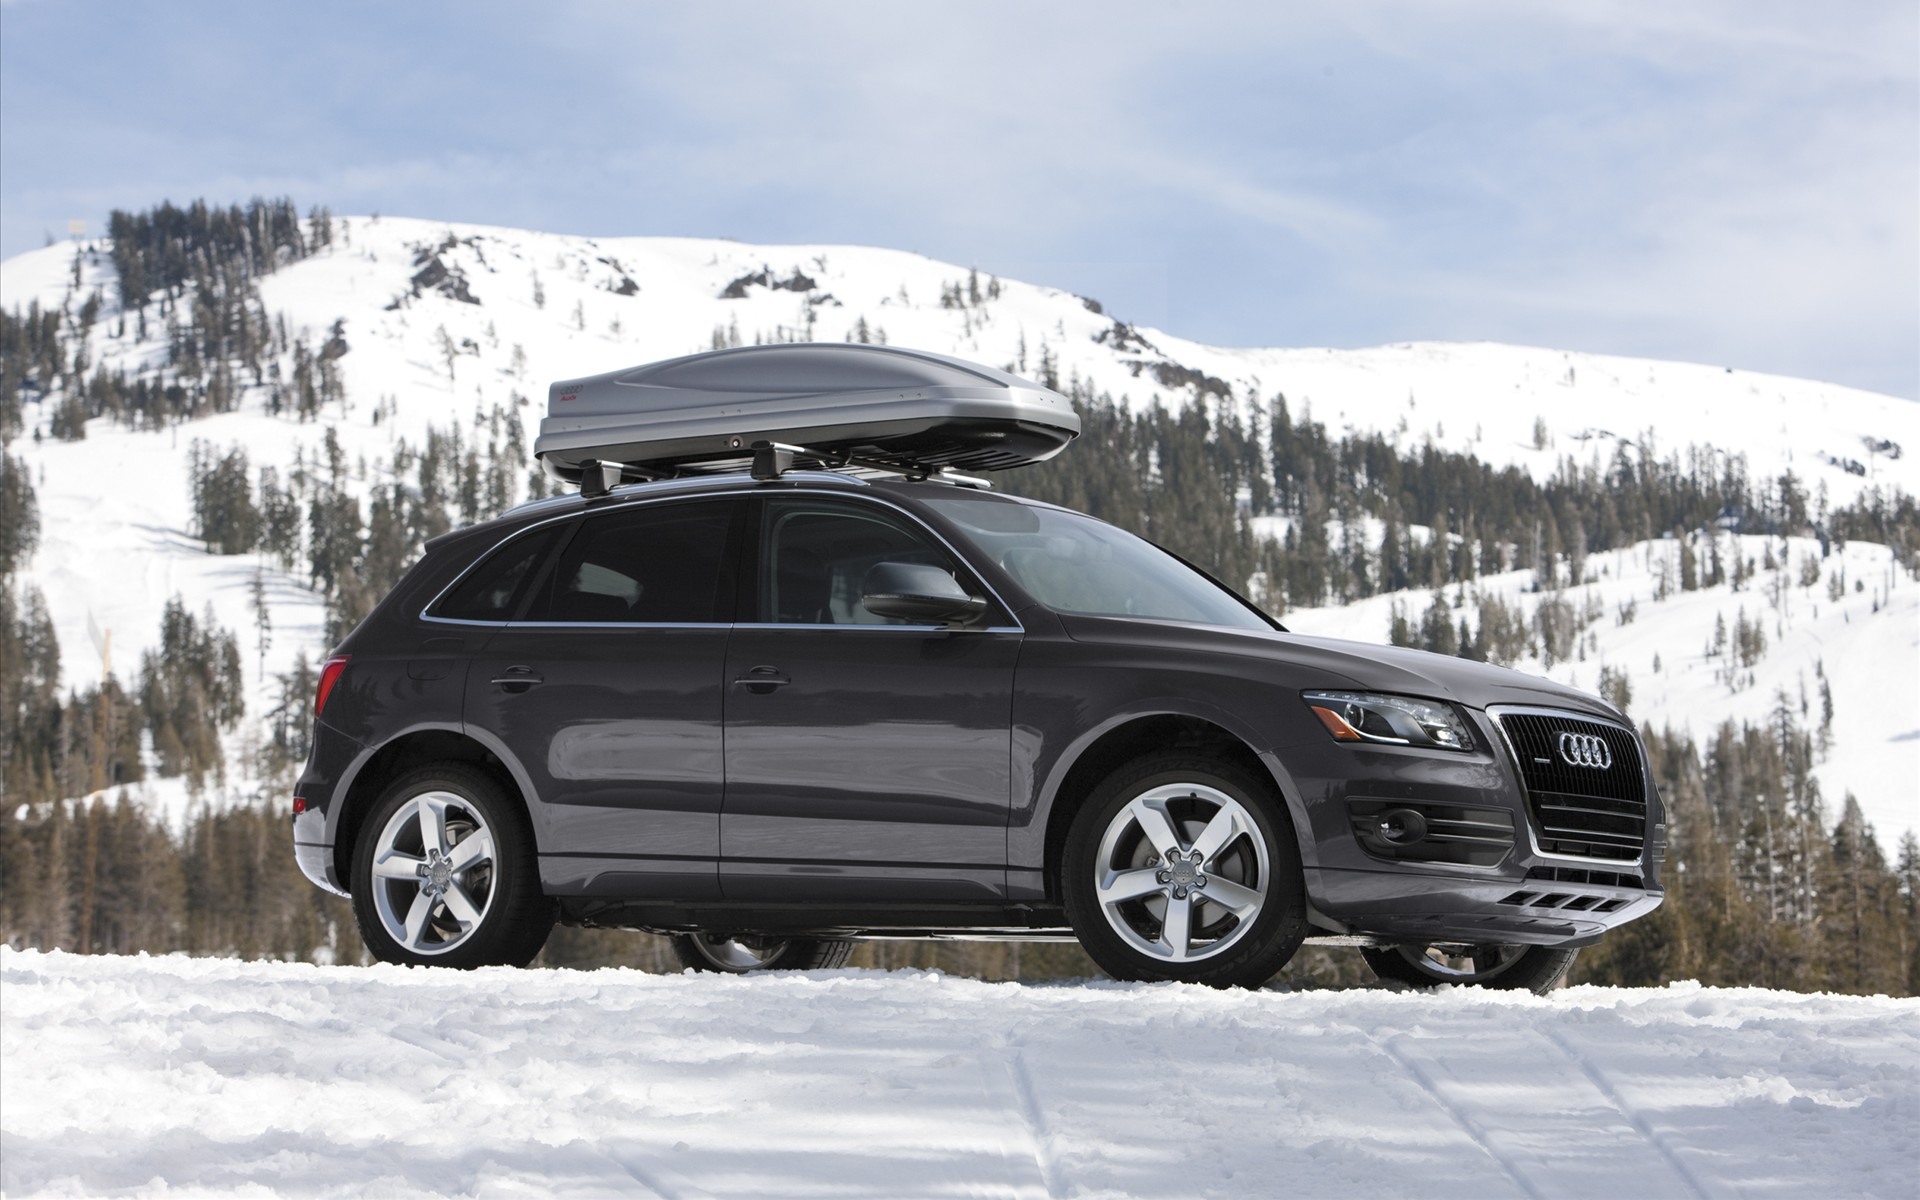 Awesome Audi Q5 Wallpaper Full HD Pictures